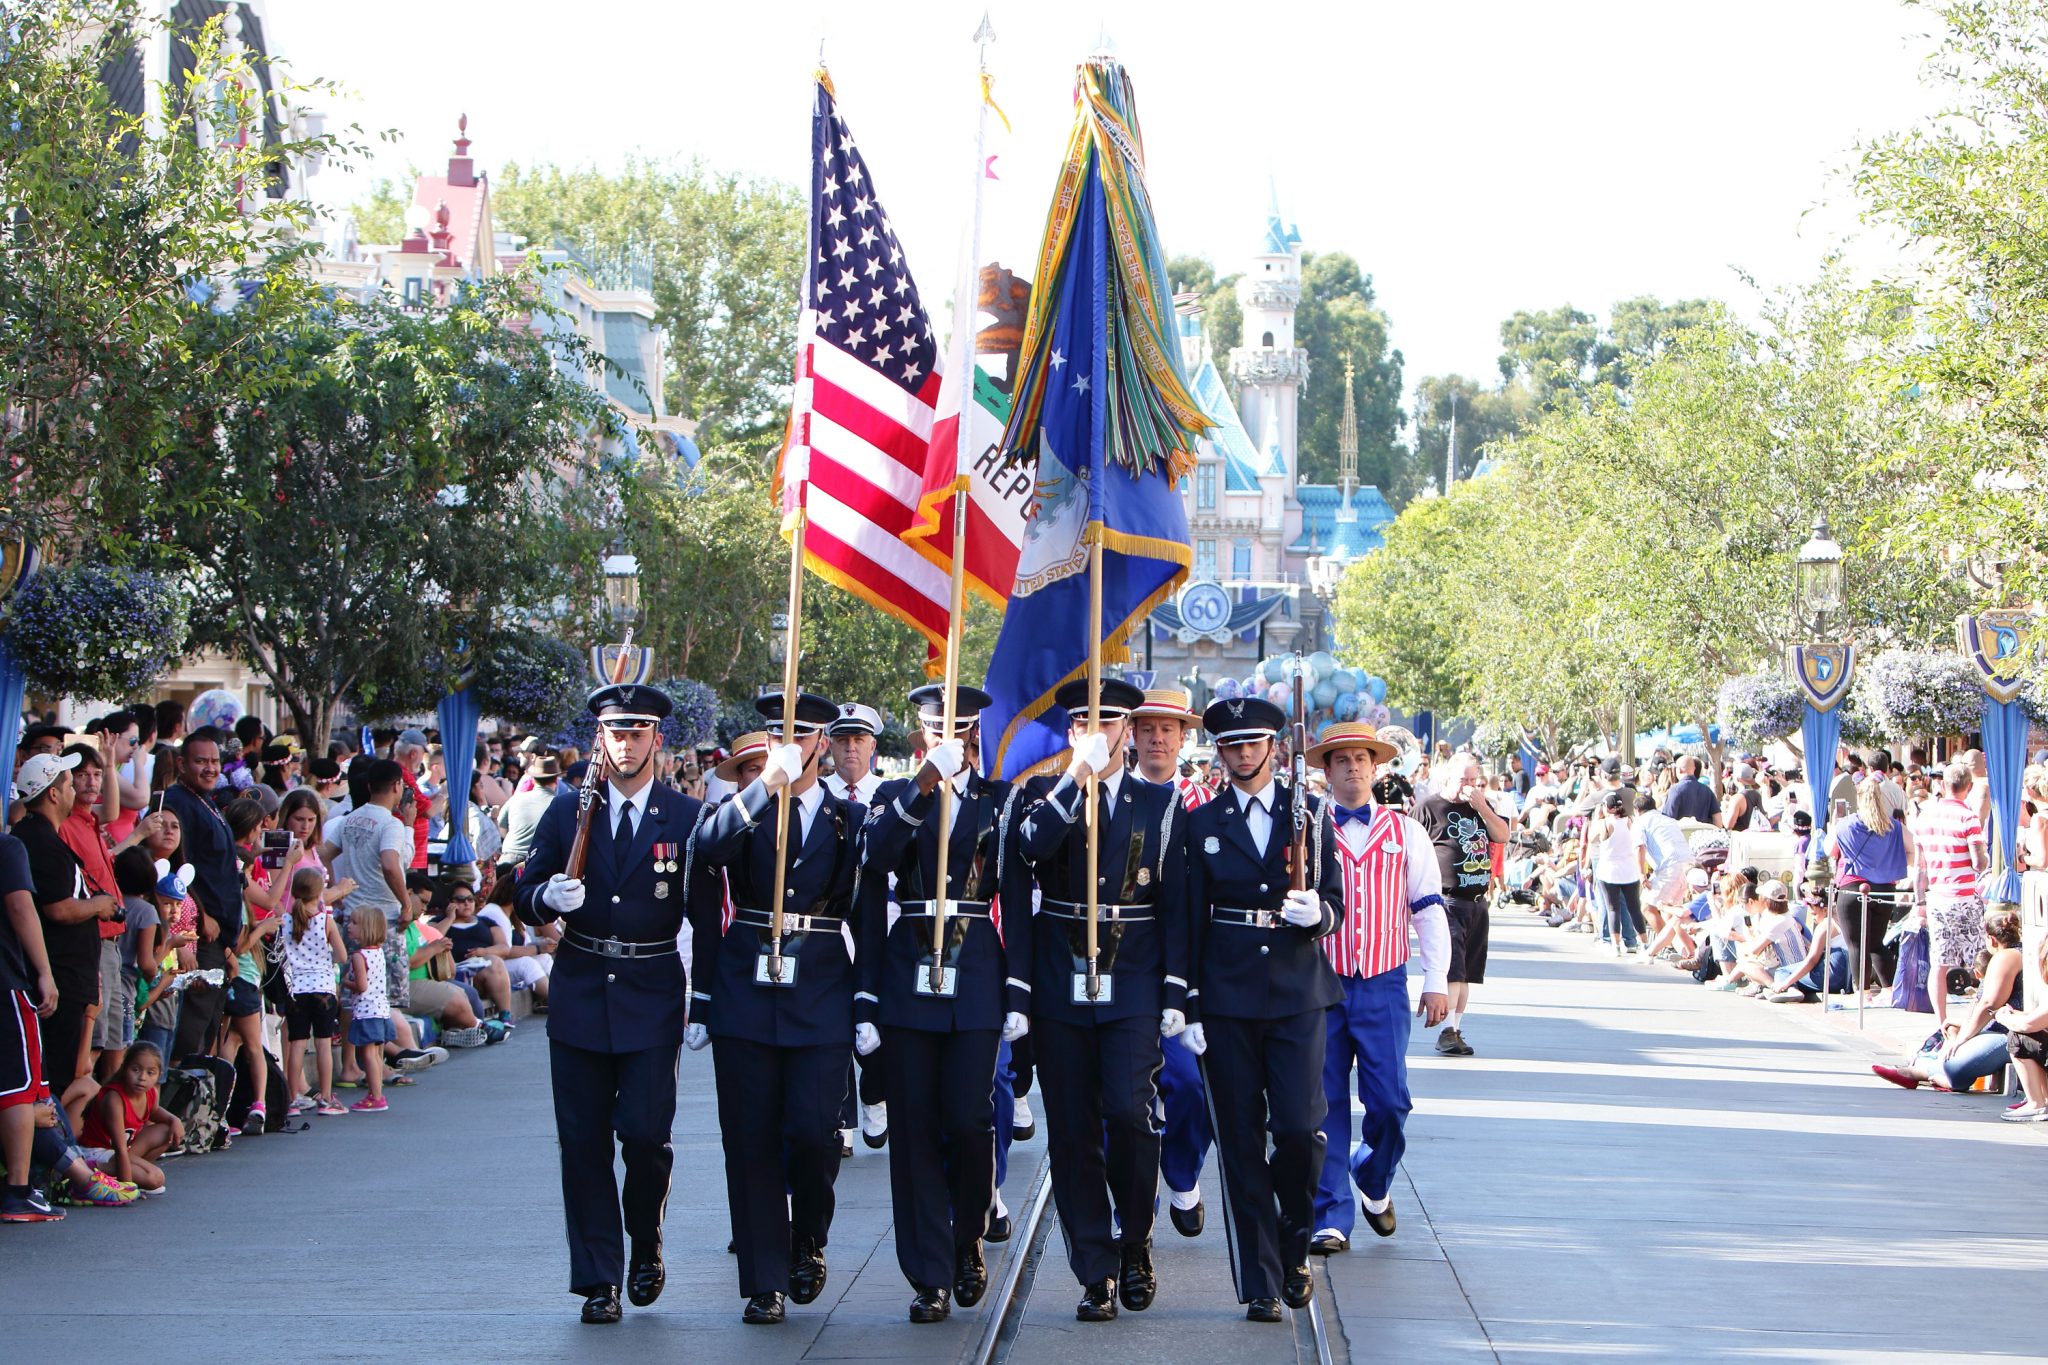 Happy 4th of July! – Patriotic Memories from the Disney Parks